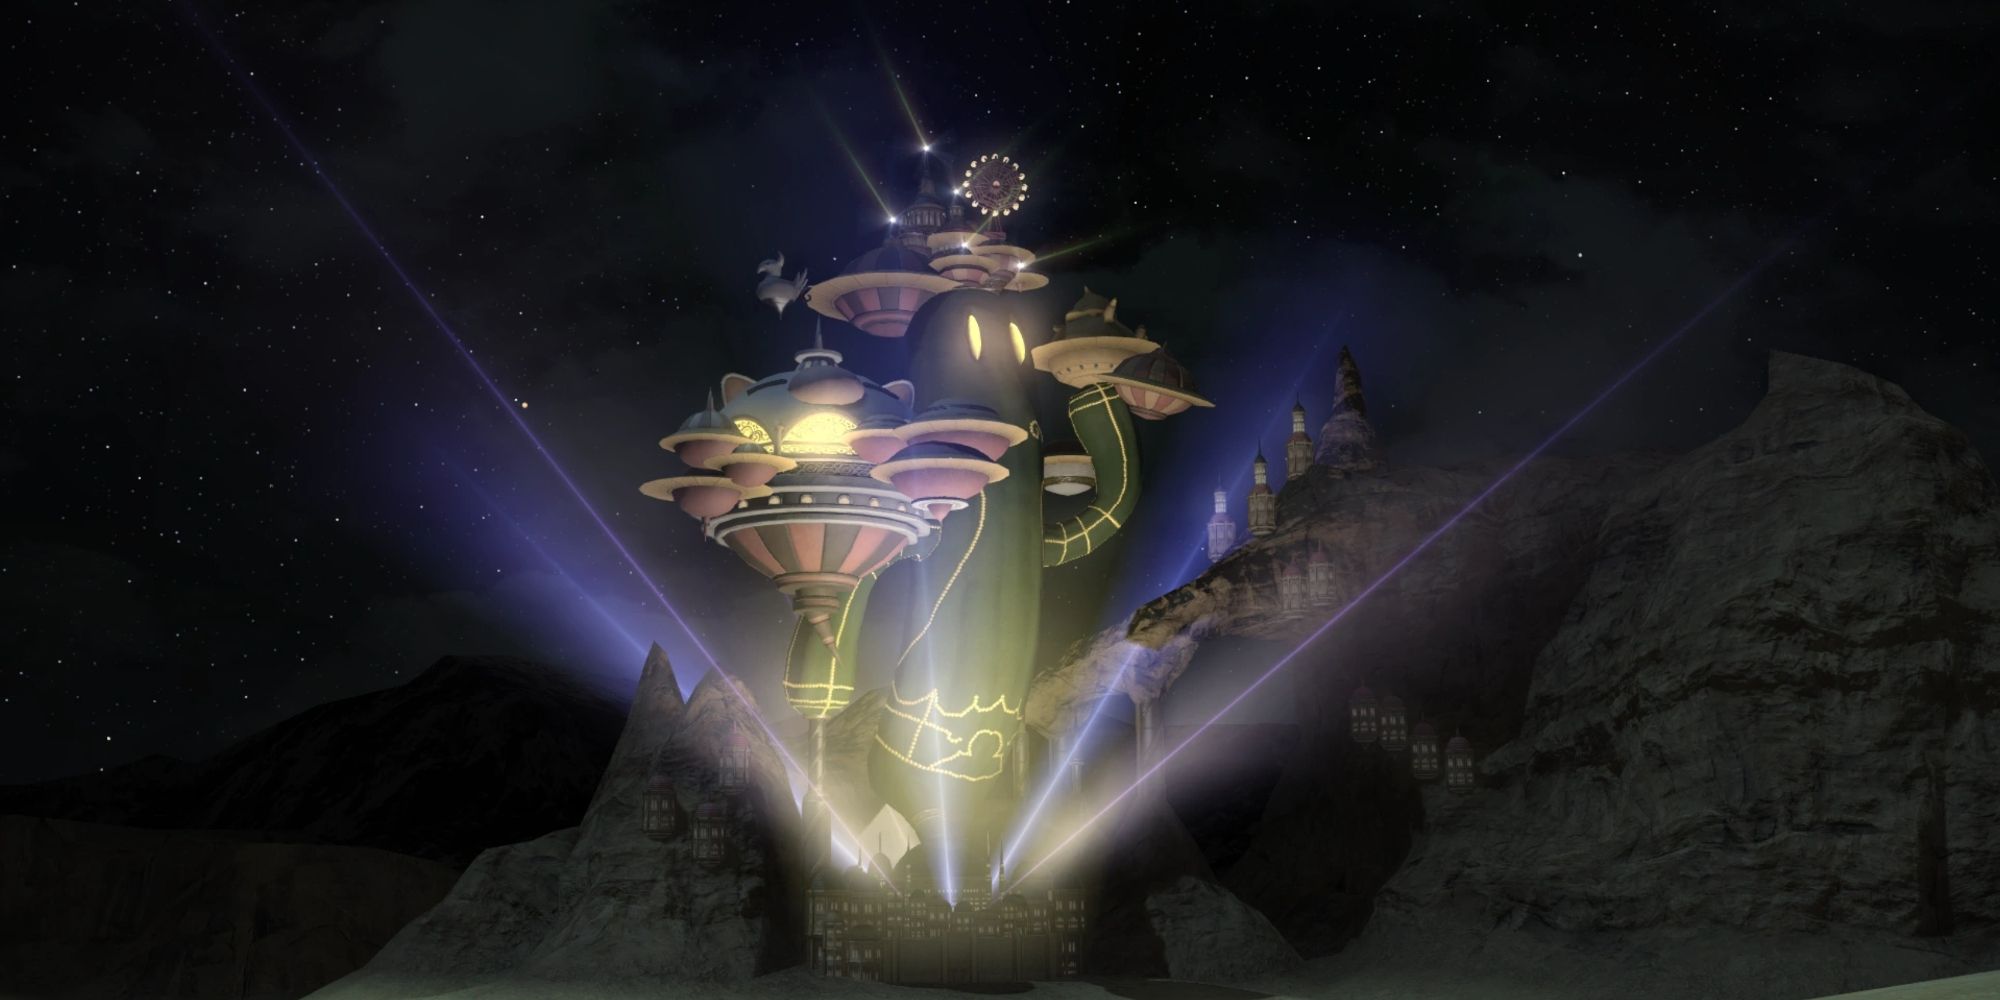 Manderville Gold Saucer from Final Fantasy 14. A large cactus structure balanced by arms and head plates and illuminated by bright lights.